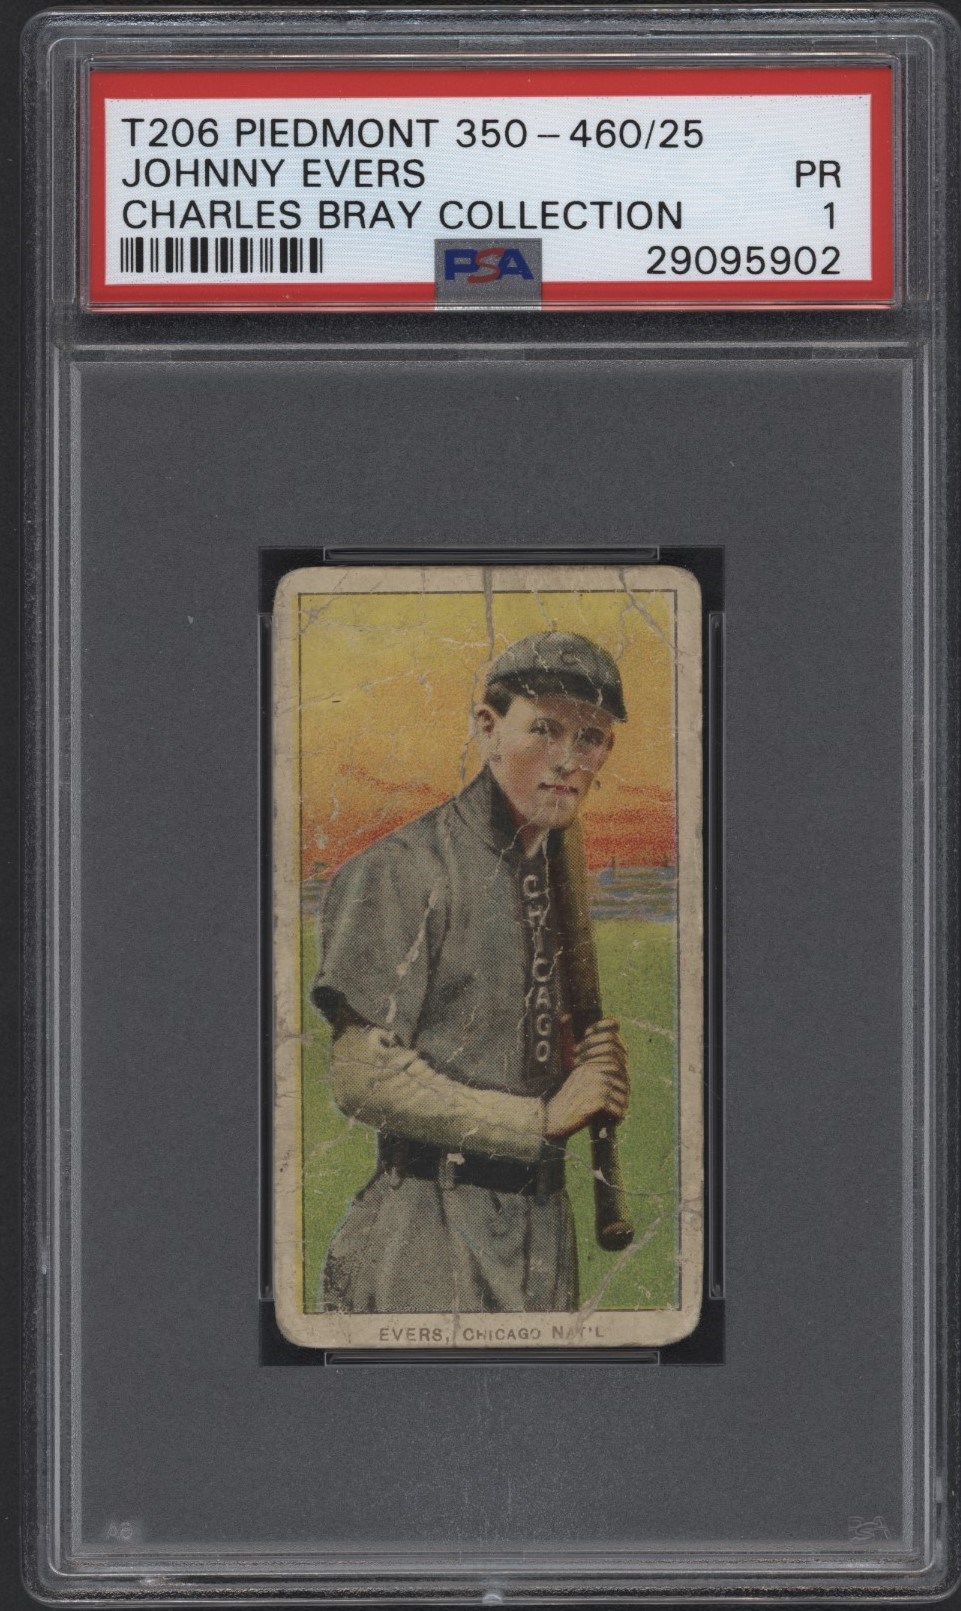 T206 Piedmont 350-460/25 Johnny Evers PSA 1 From the Charles Bray Collection